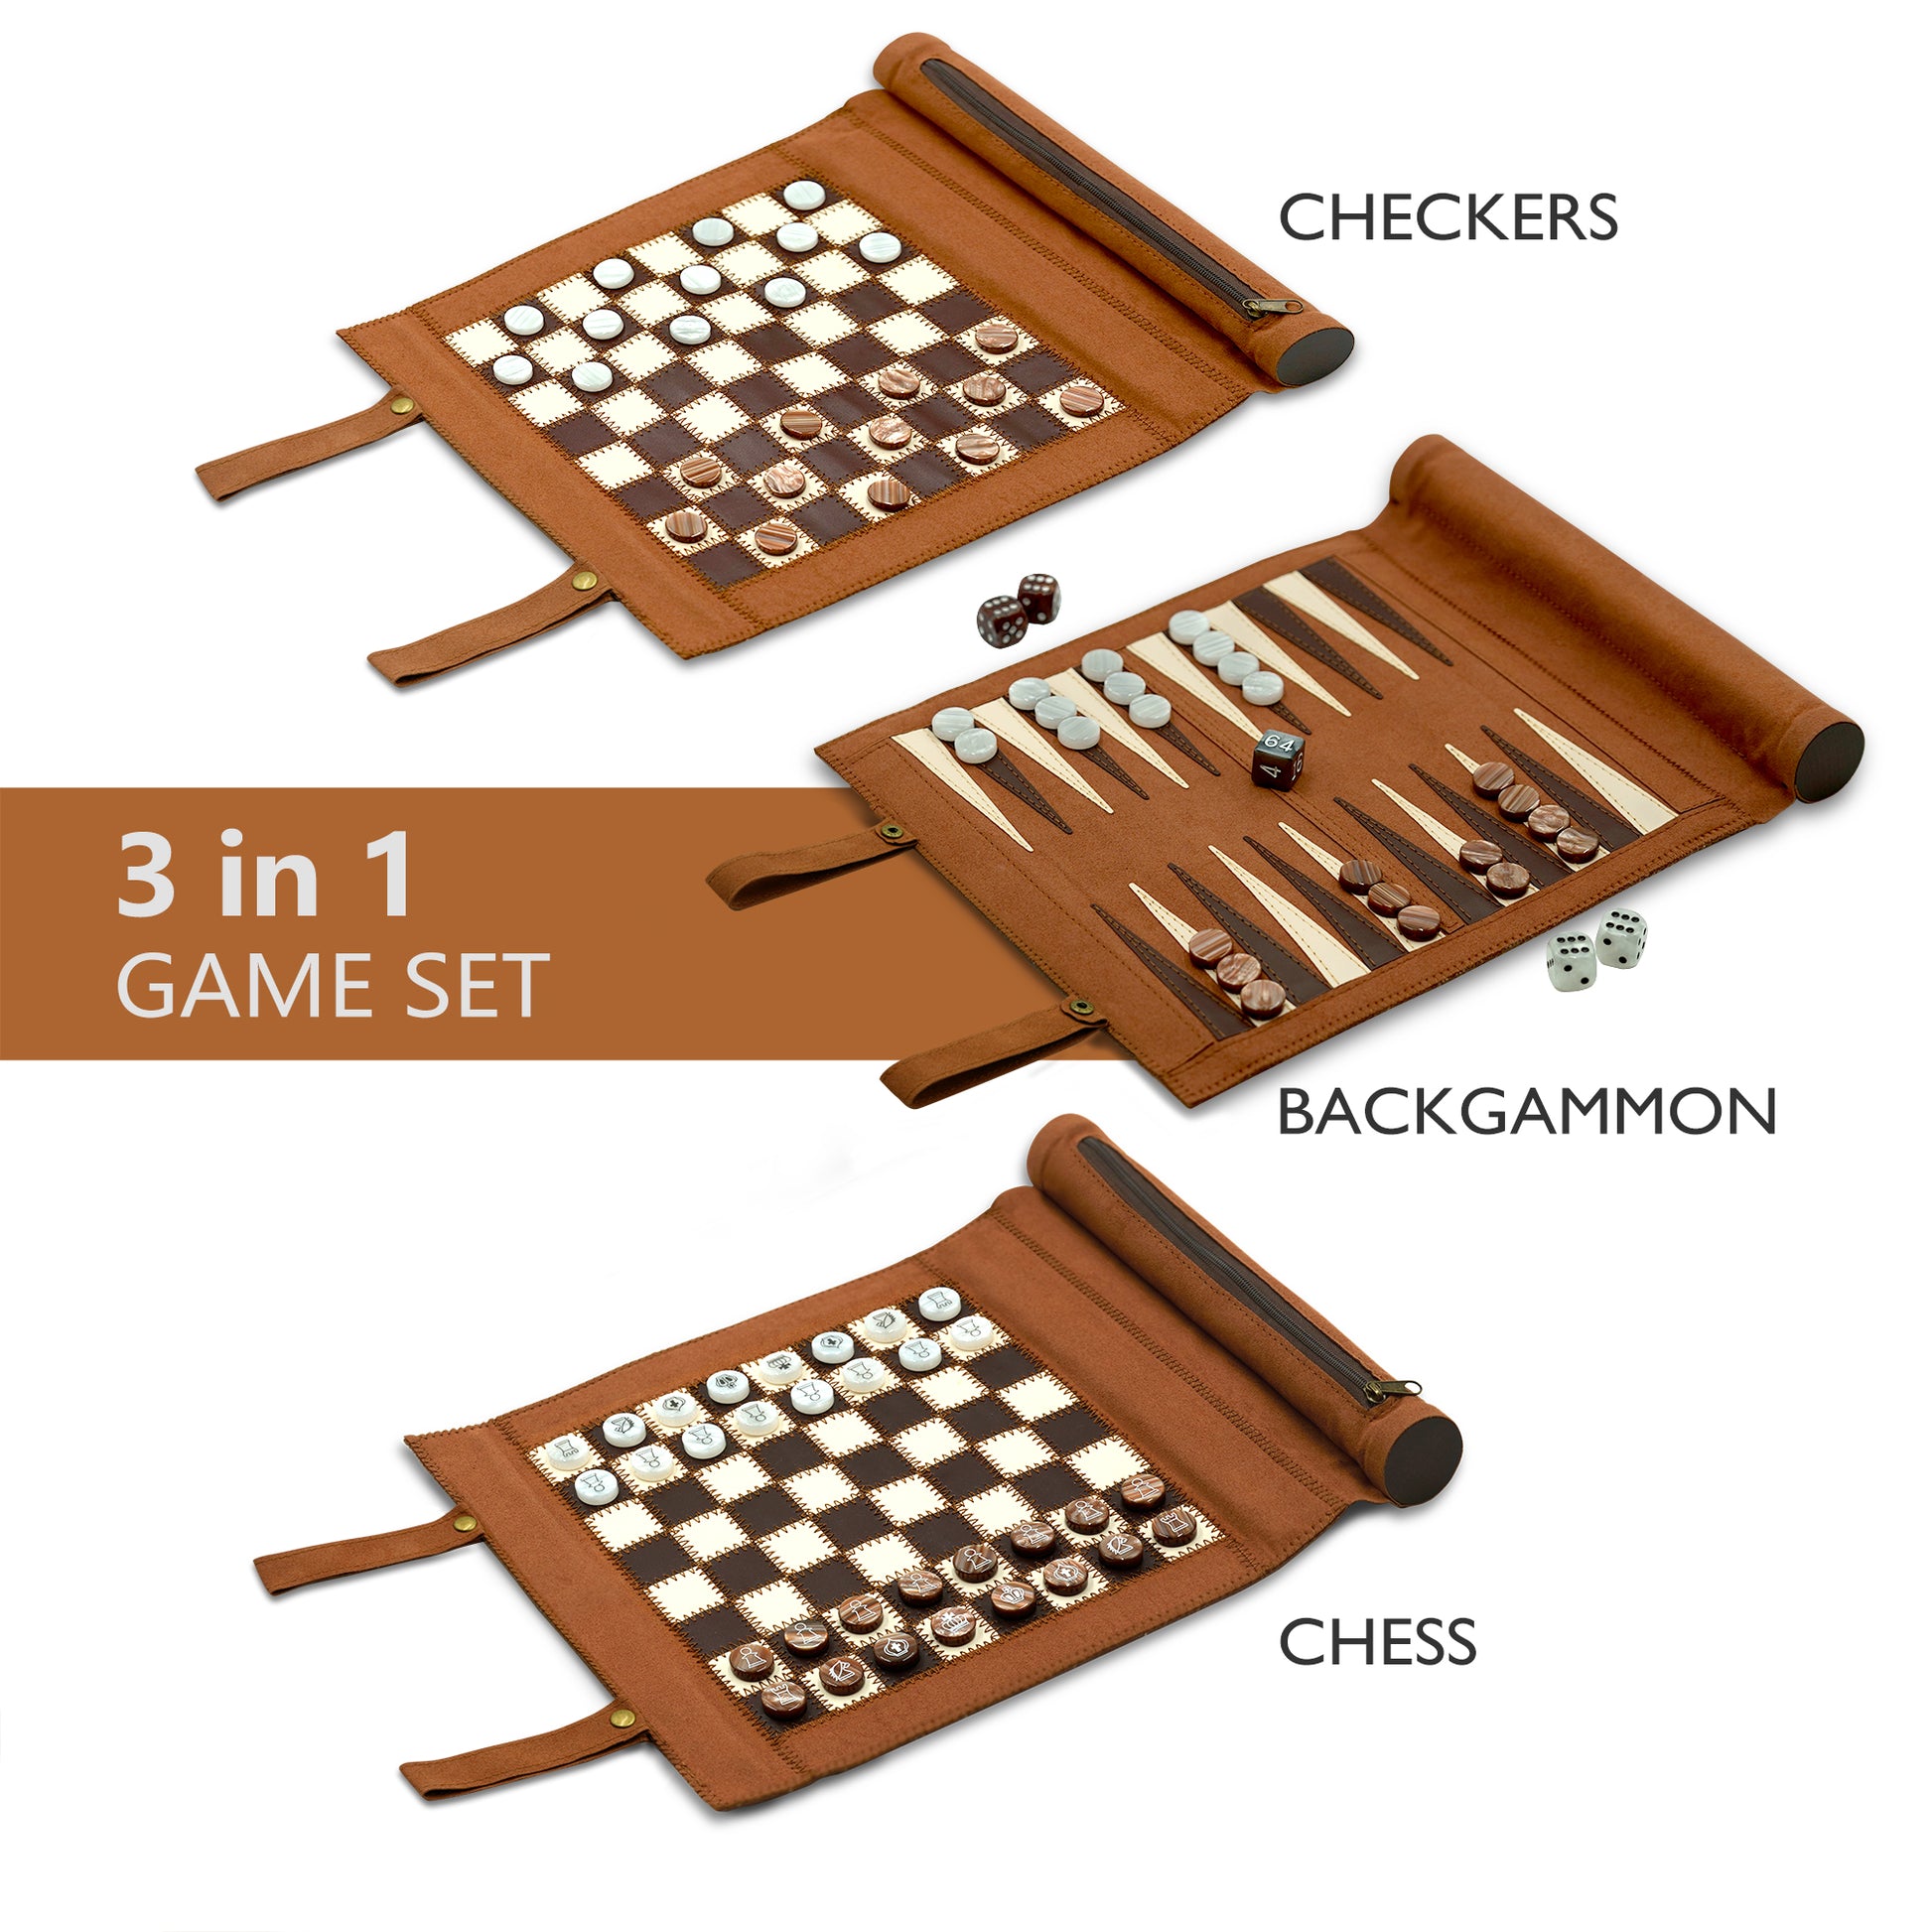 Book tab with chess puzzles vol. 3 (A-119) - Caissa Chess Store